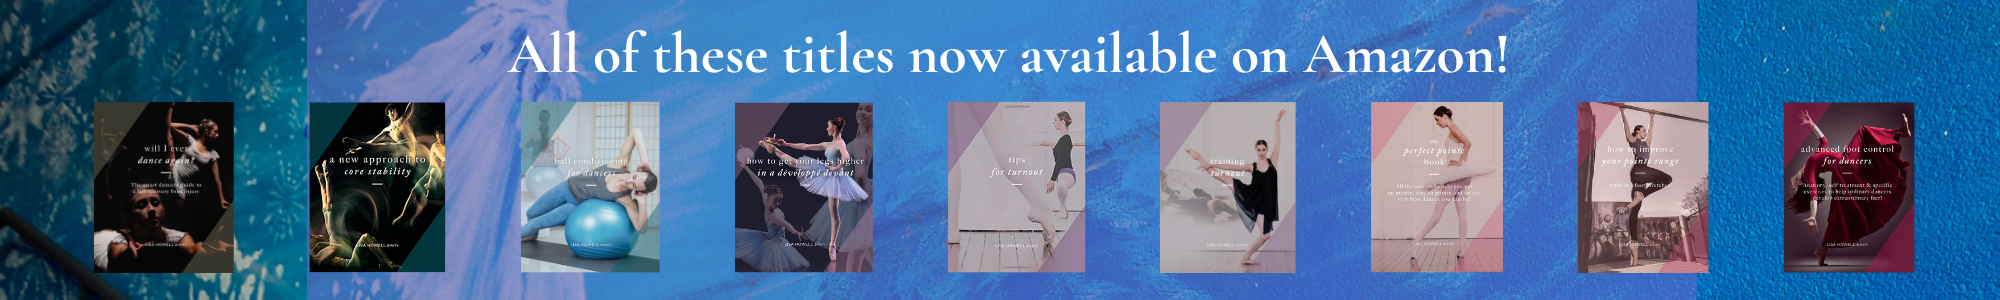 All Titles now Available on Amazon - Product Banner - Lisa Howell - The Ballet Blog